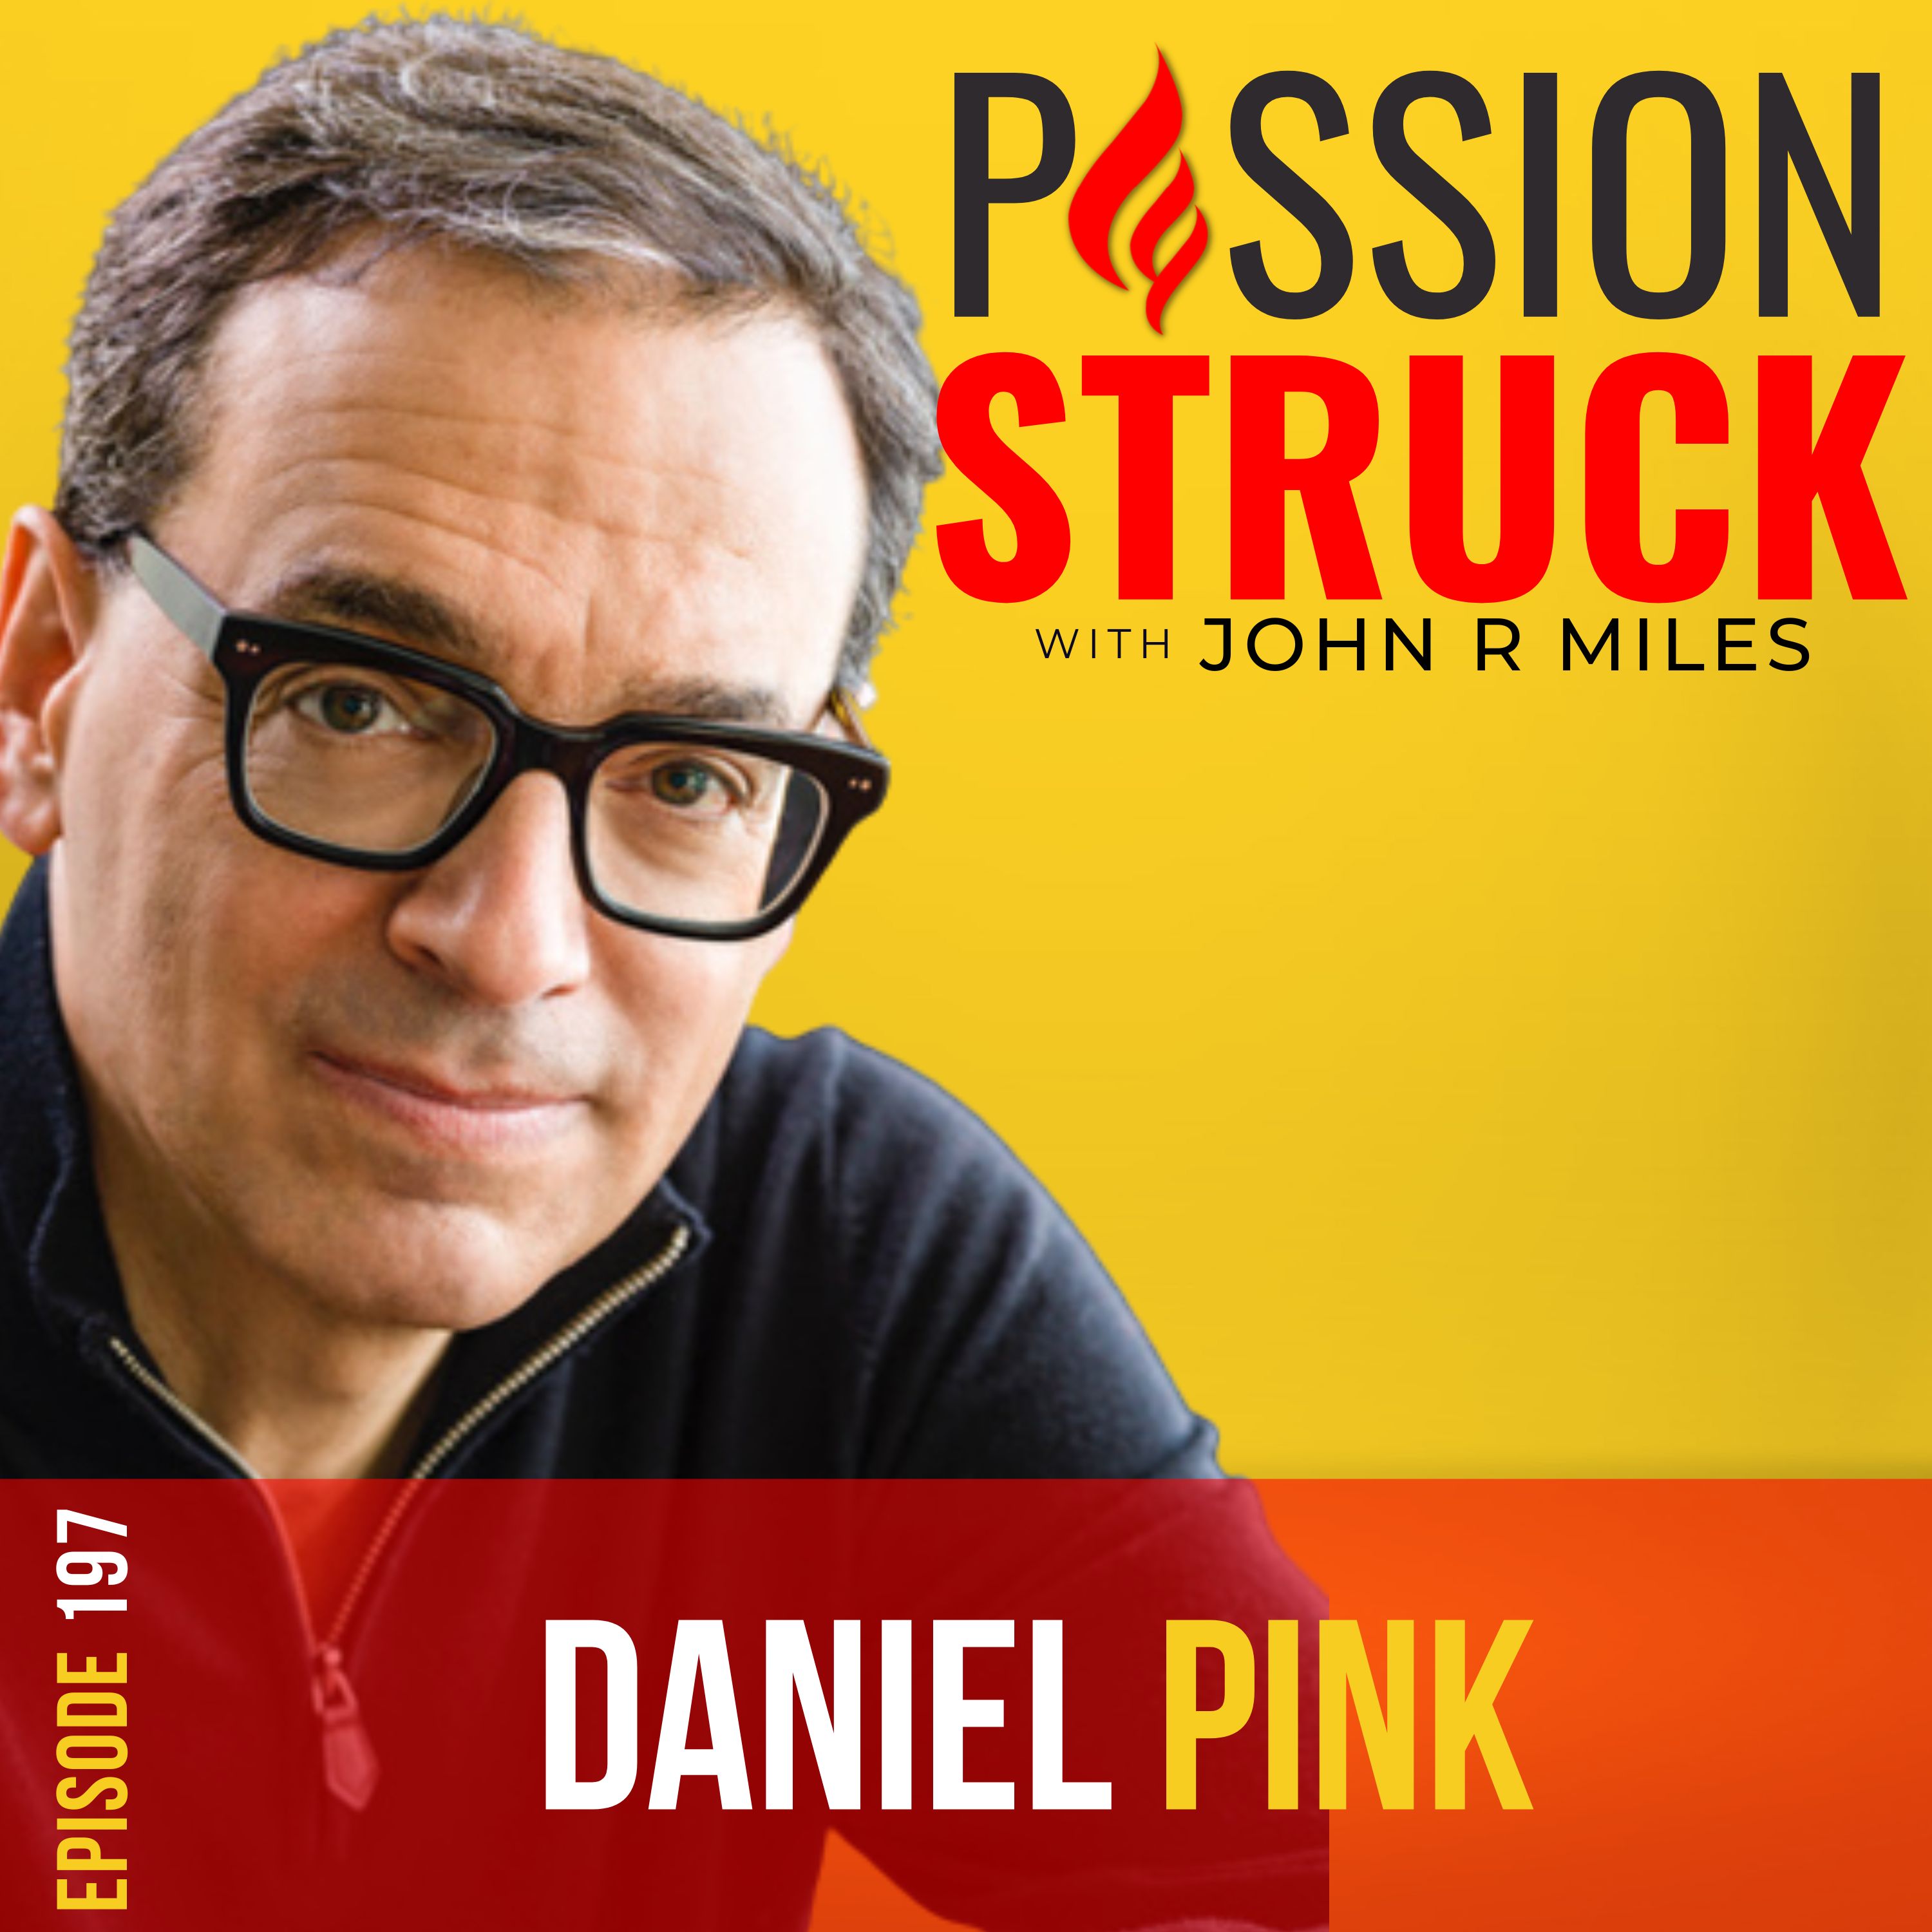 Passion Struck with John R. Miles album cover episode 197 with Daniel Pink about the power of regret